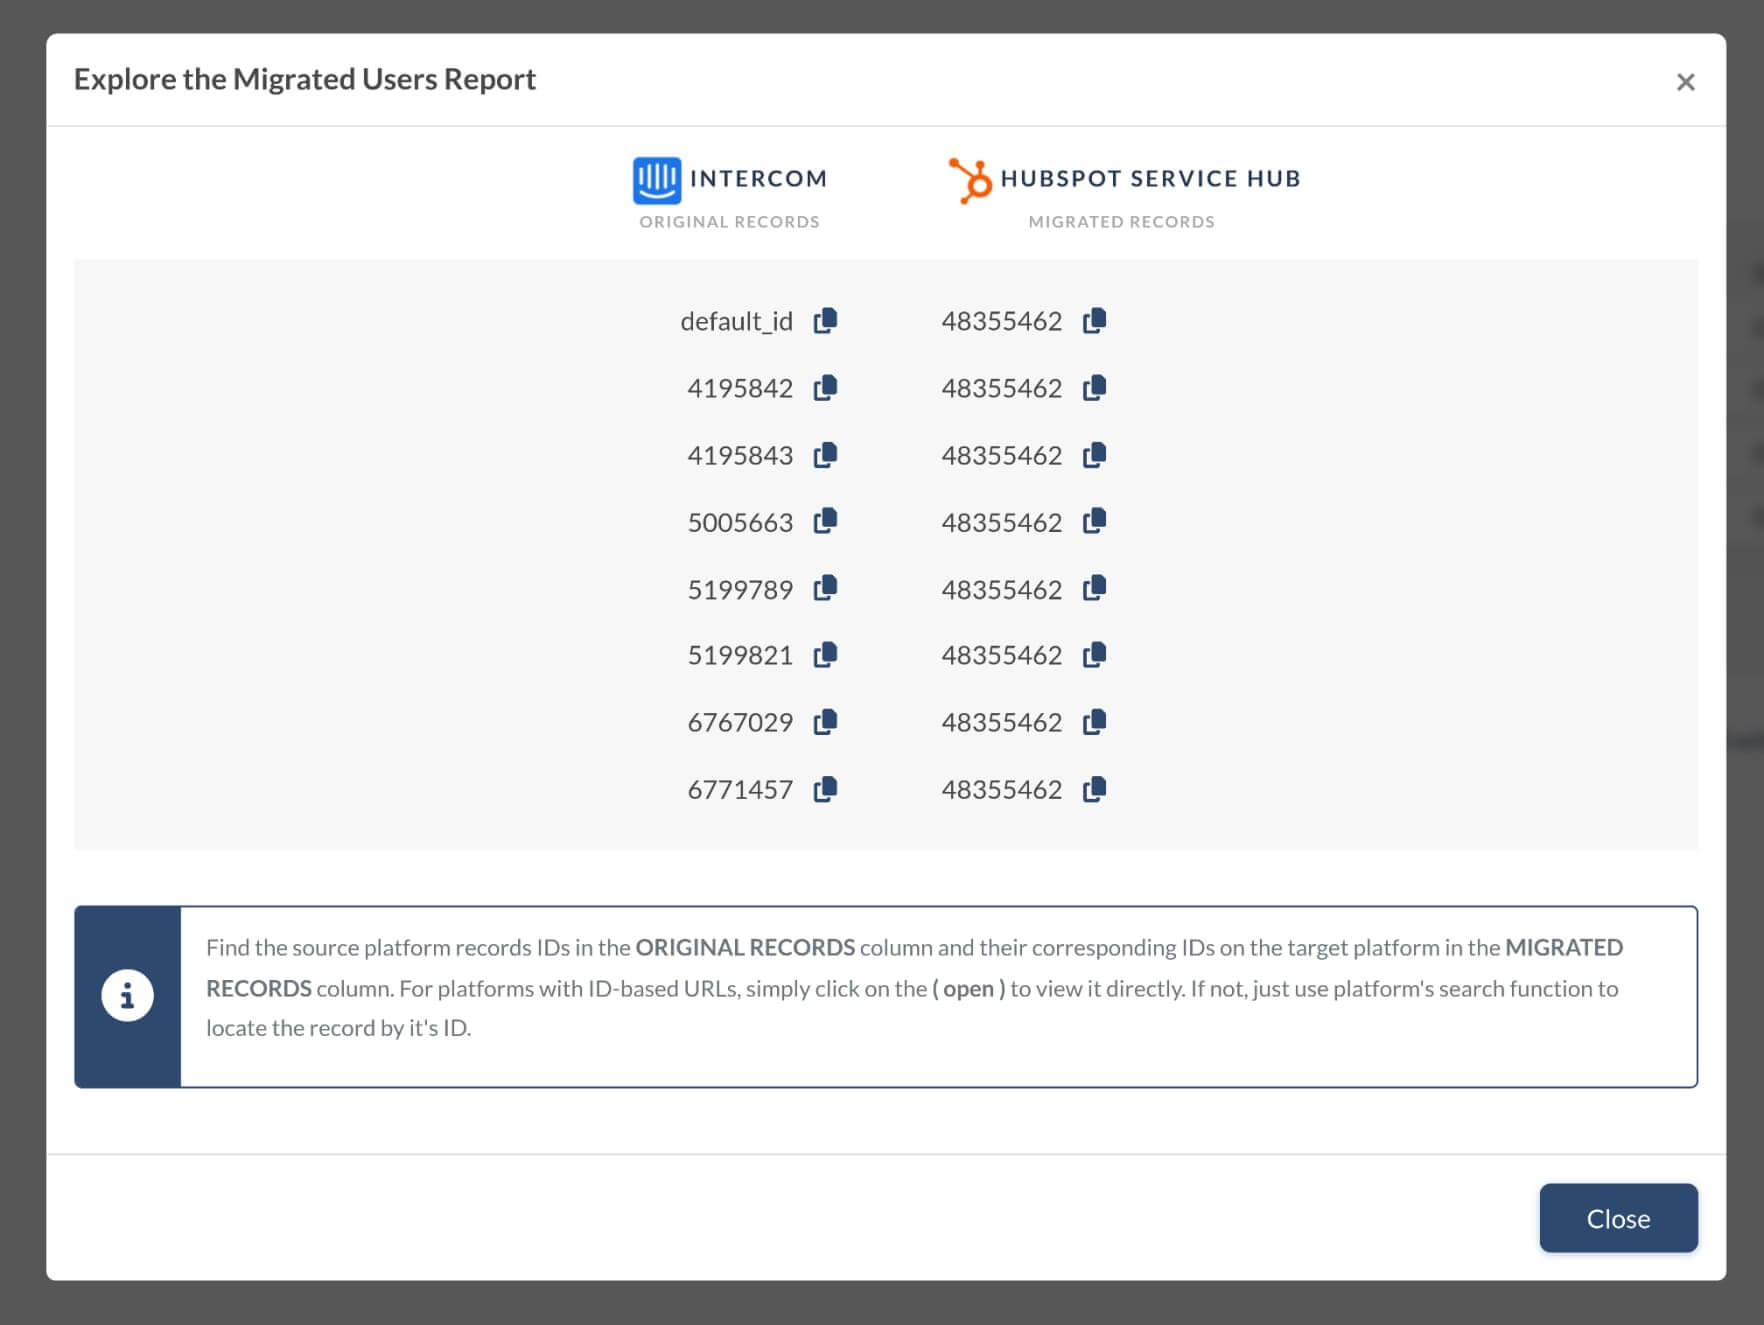 Demo migration - HubSpot users reports